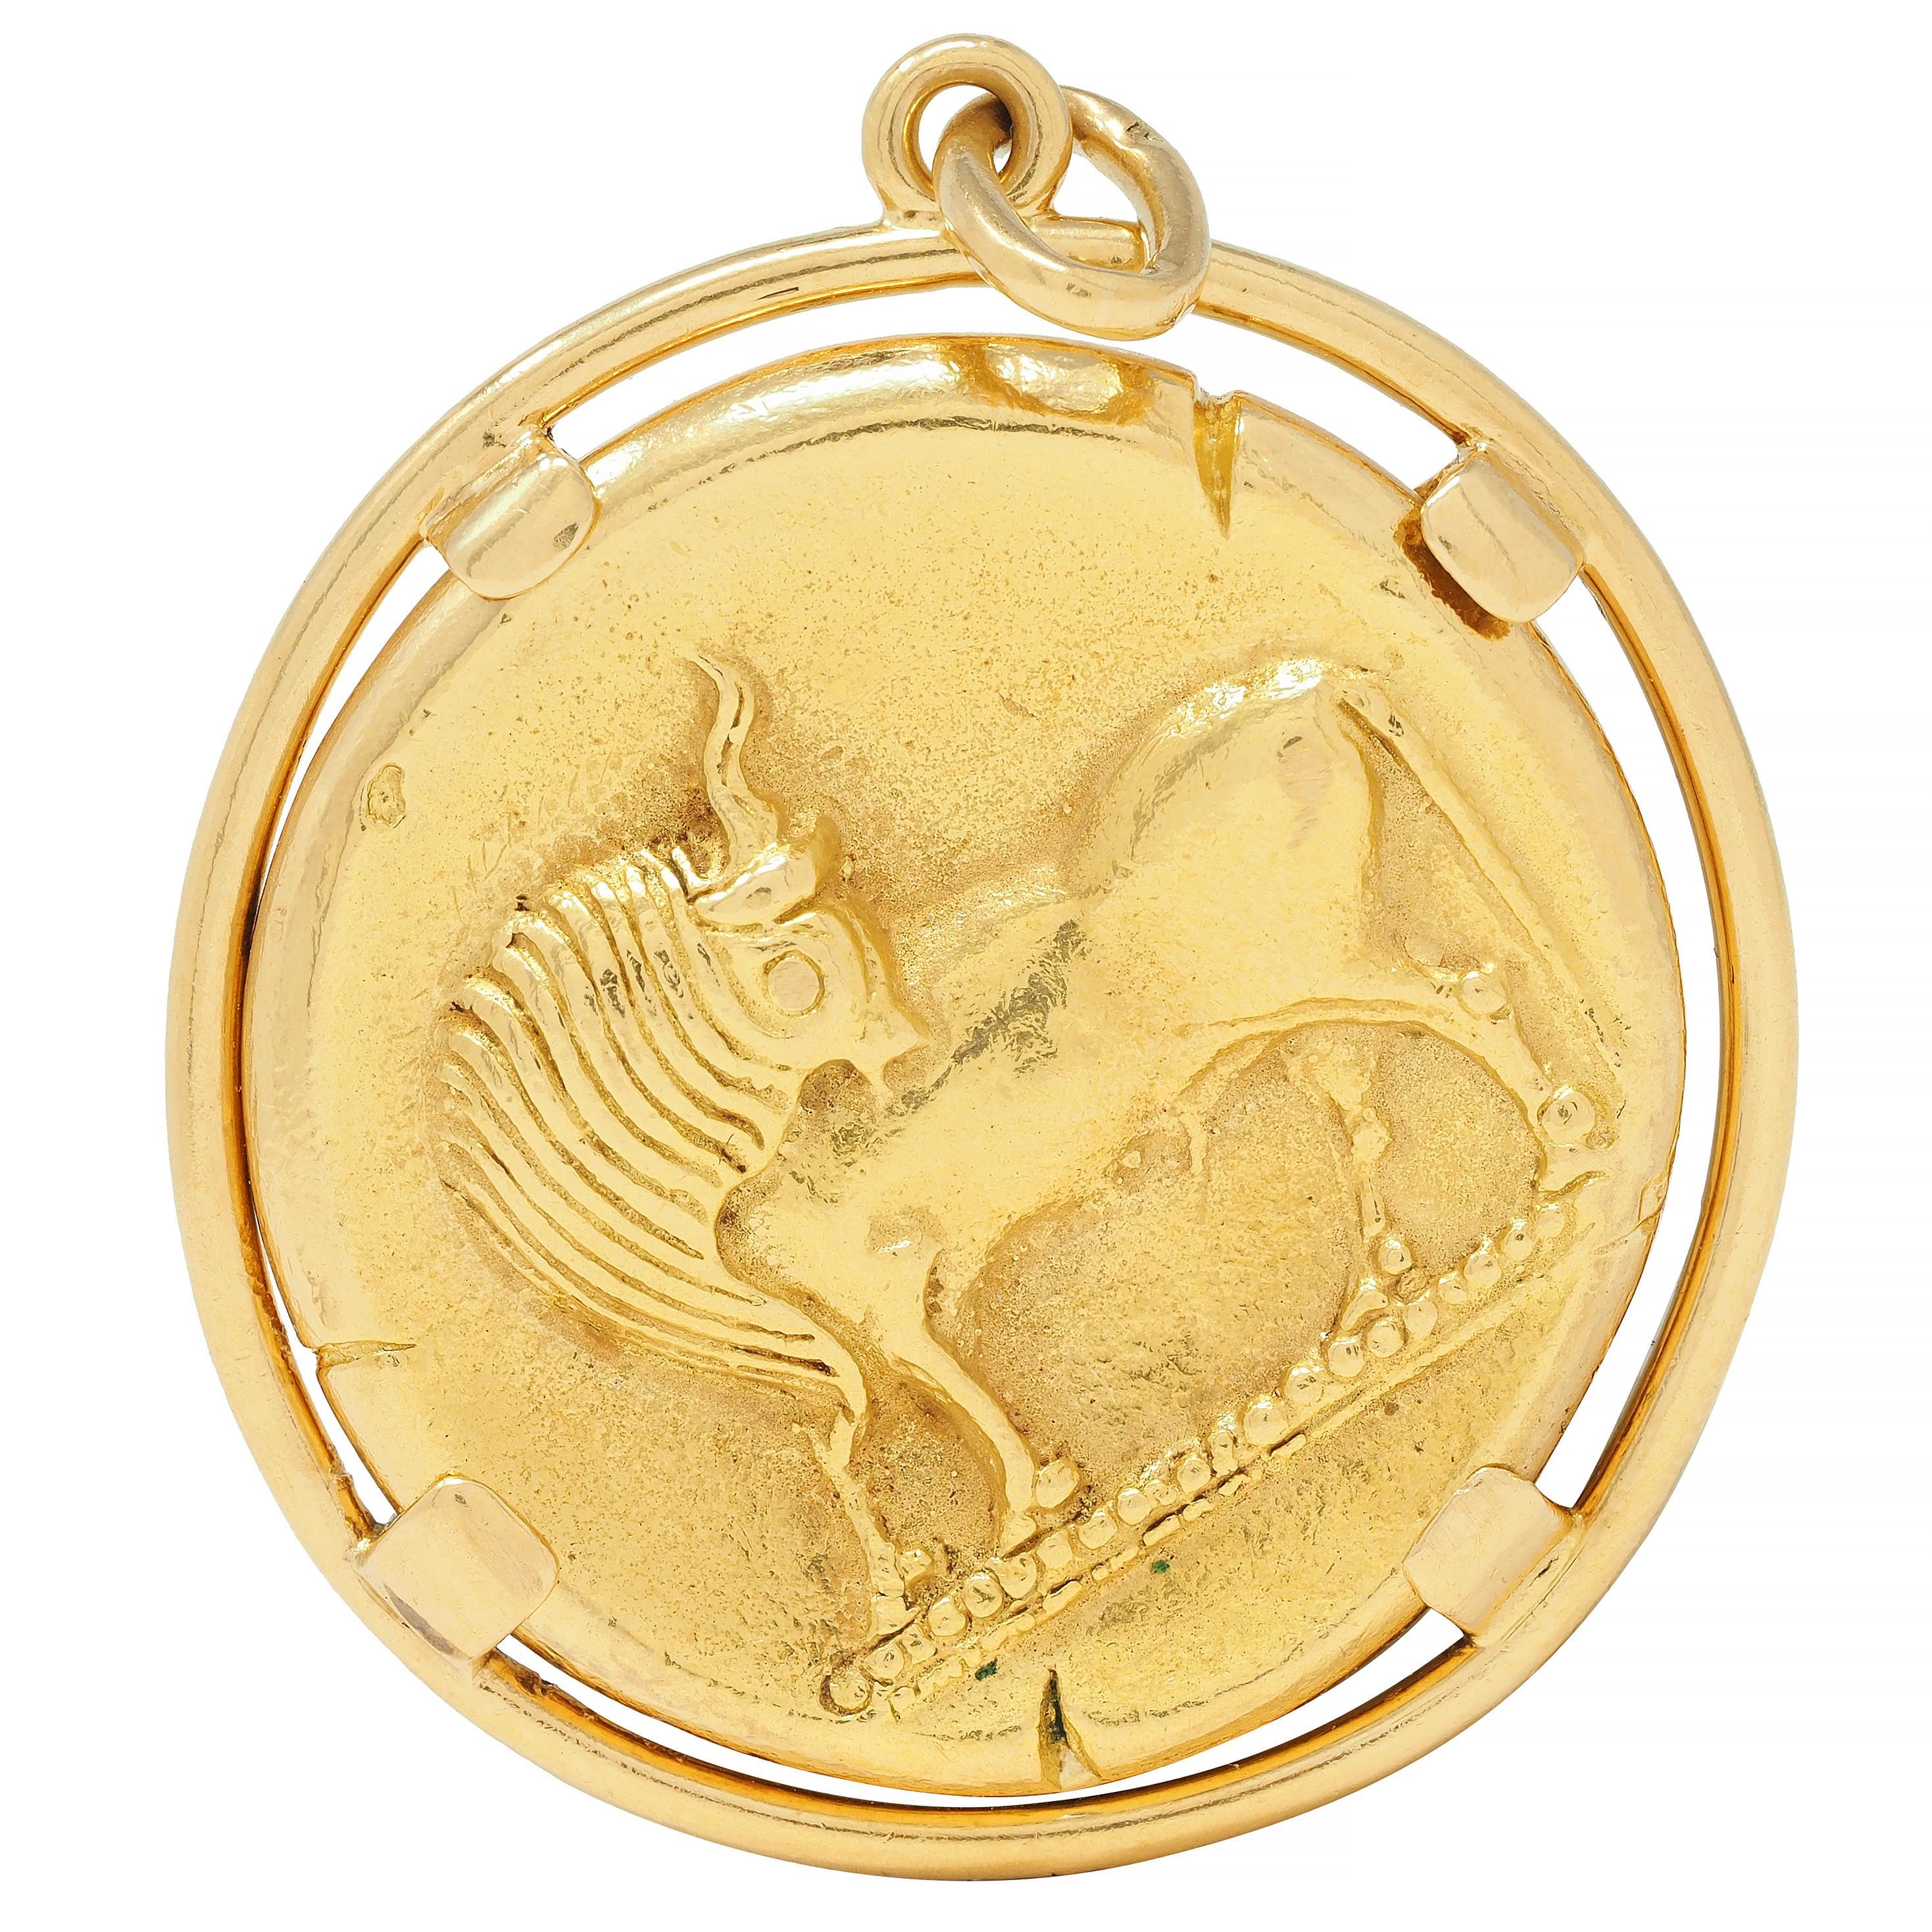 Designed as a stylized Taurus figure with detailed features
Verso depicting the Taurus astrological sign
Centered in a pierced round frame surround
Suspending from jump ring bale
Stamped with French assay marks for 18 karat gold
Numbered and fully